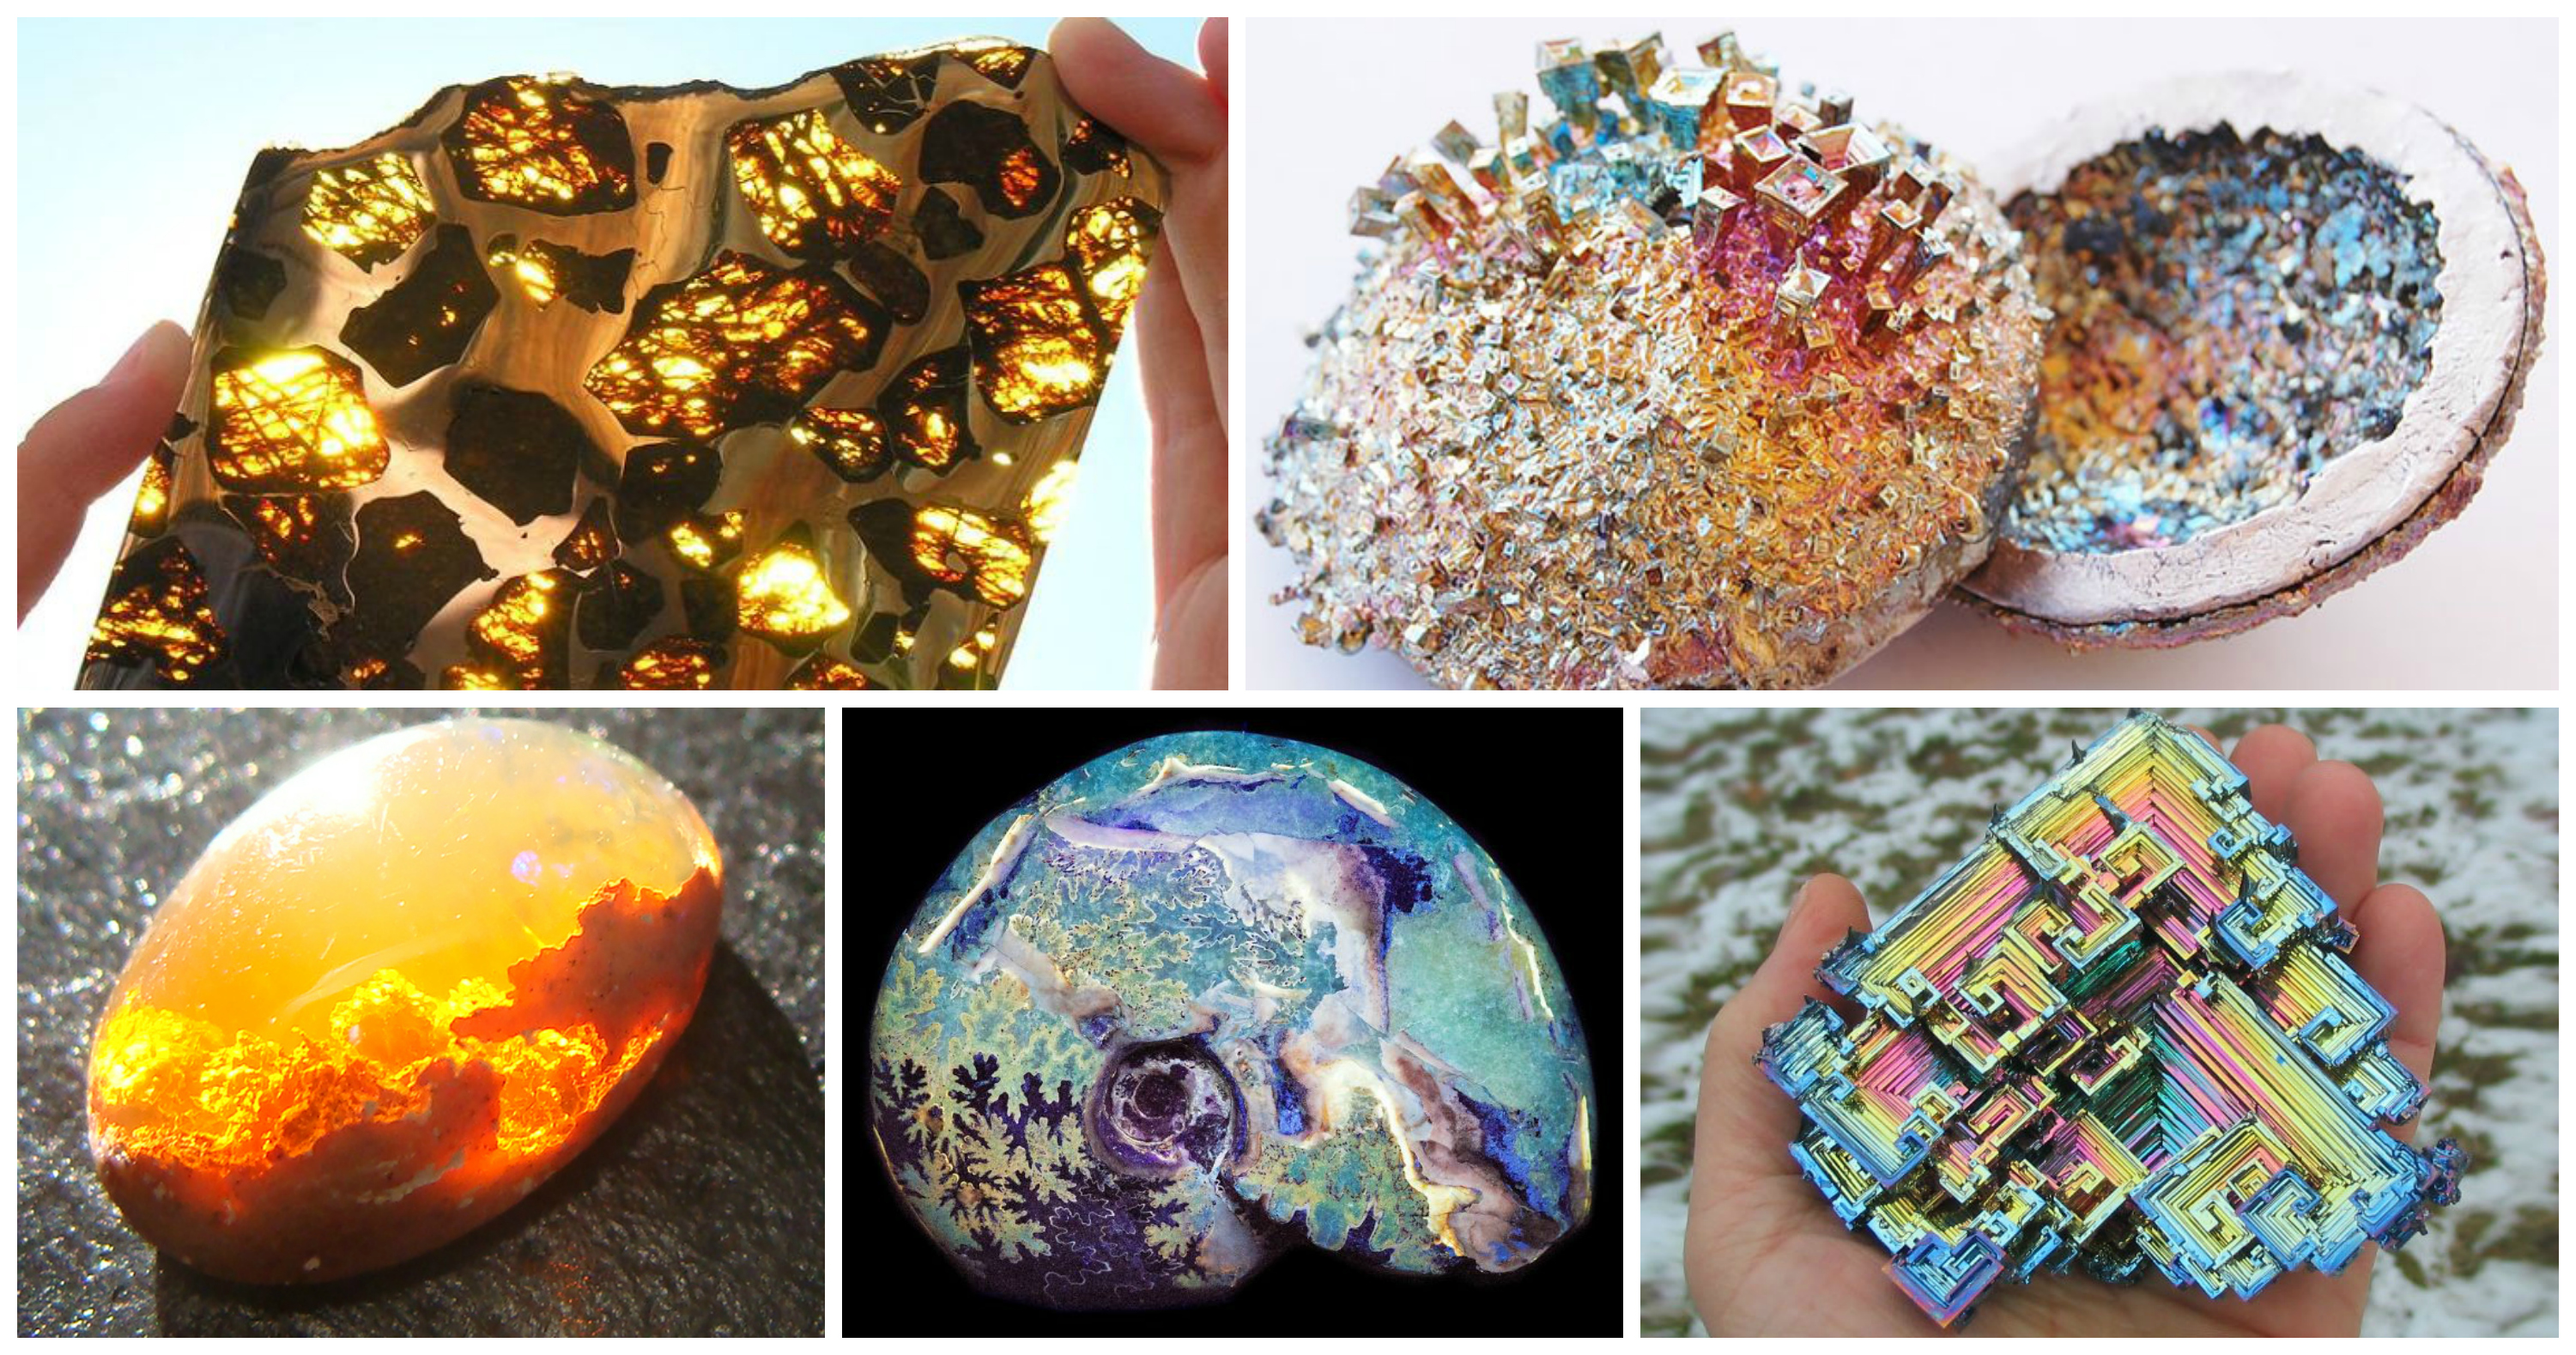 25 Most Beautiful Stones Ever Found In The World RVCJ Media